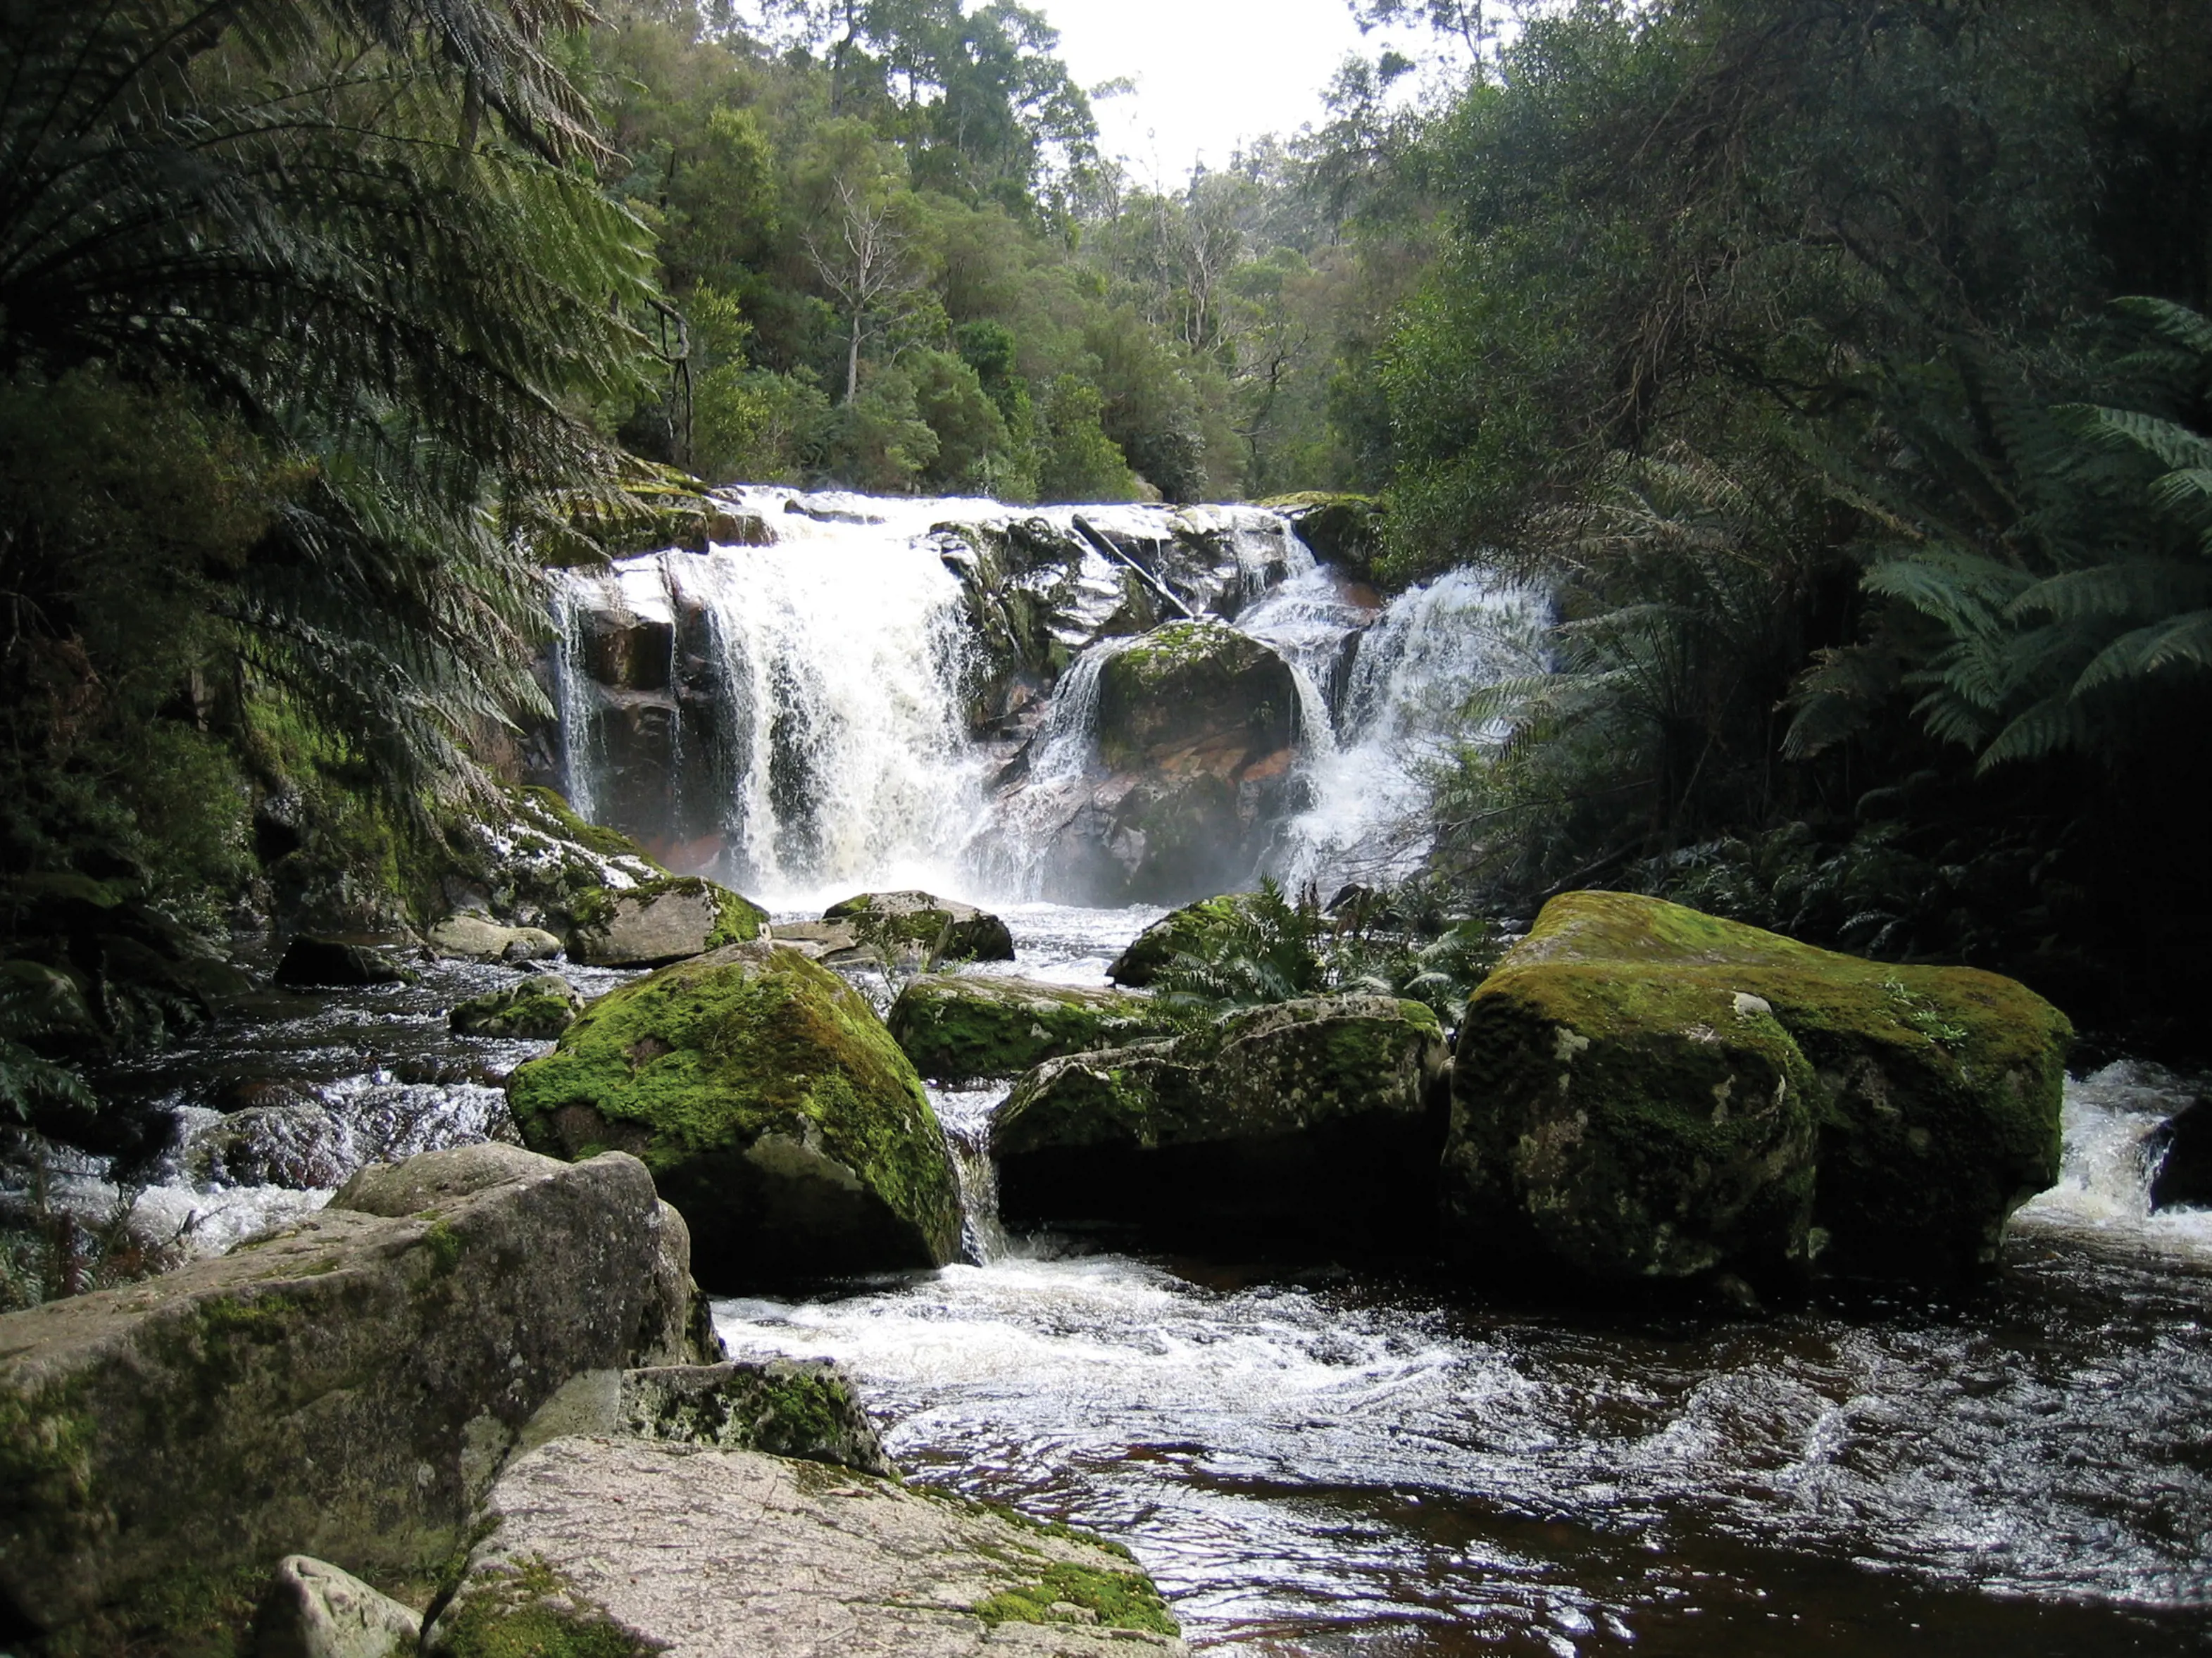 Landscape of the top of Halls Falls, with rocks in the foreground.